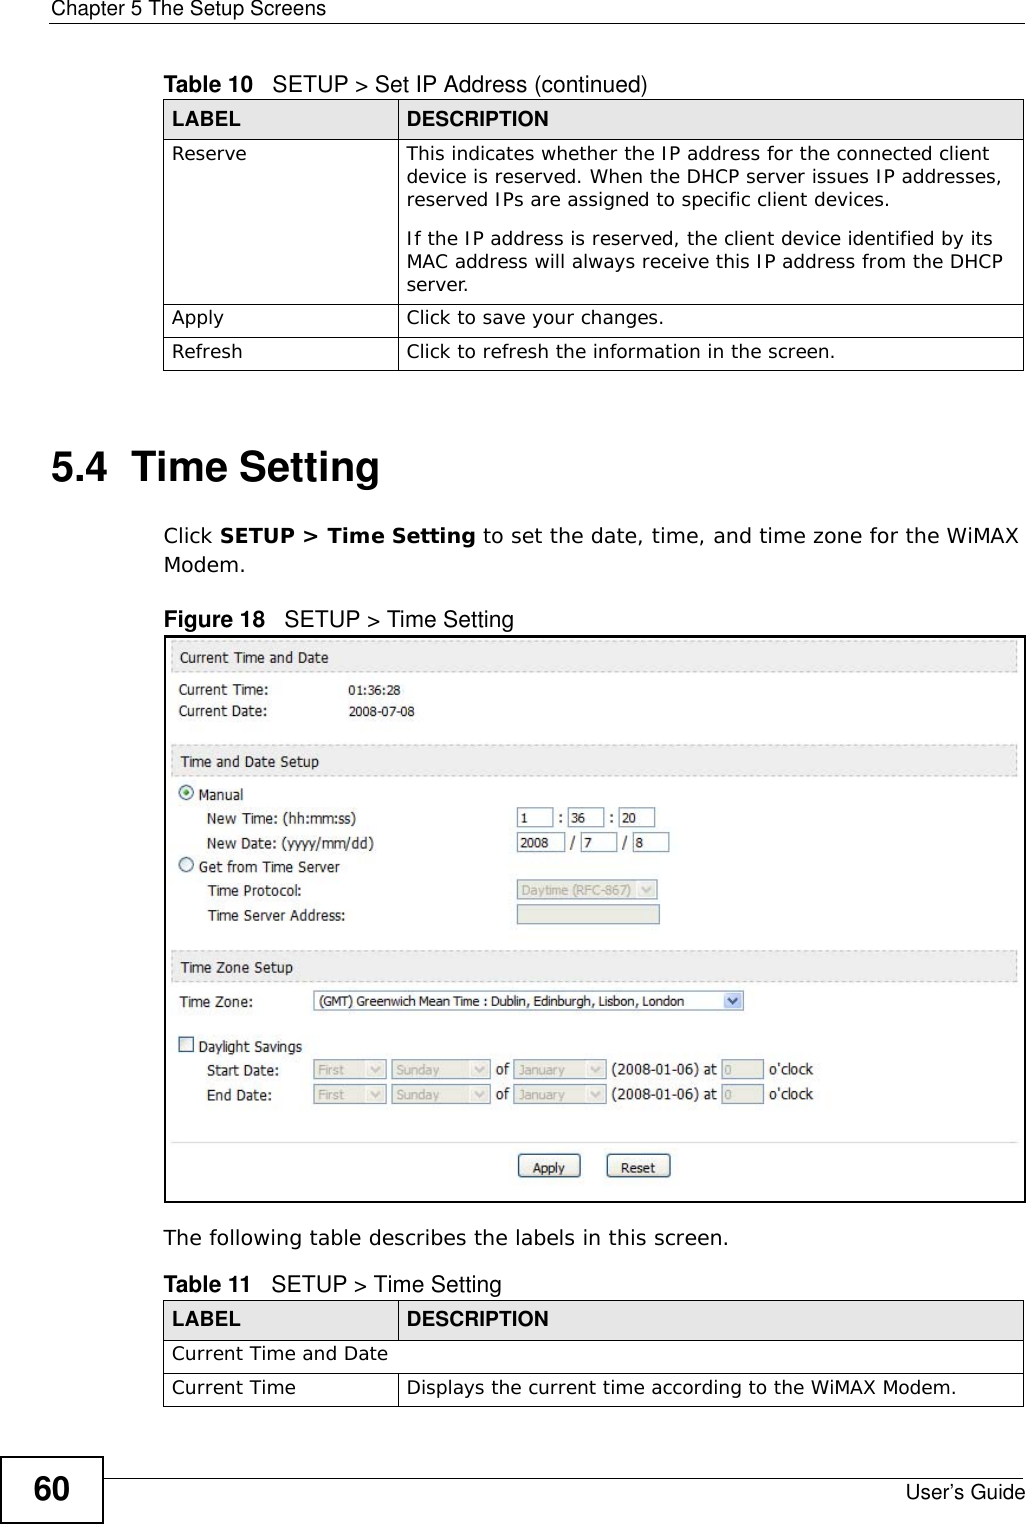 Chapter 5 The Setup ScreensUser’s Guide605.4  Time SettingClick SETUP &gt; Time Setting to set the date, time, and time zone for the WiMAX Modem.Figure 18   SETUP &gt; Time SettingThe following table describes the labels in this screen. Reserve This indicates whether the IP address for the connected client device is reserved. When the DHCP server issues IP addresses, reserved IPs are assigned to specific client devices.If the IP address is reserved, the client device identified by its MAC address will always receive this IP address from the DHCP server.Apply Click to save your changes.Refresh Click to refresh the information in the screen.Table 10   SETUP &gt; Set IP Address (continued)LABEL DESCRIPTIONTable 11   SETUP &gt; Time SettingLABEL DESCRIPTIONCurrent Time and DateCurrent Time Displays the current time according to the WiMAX Modem.